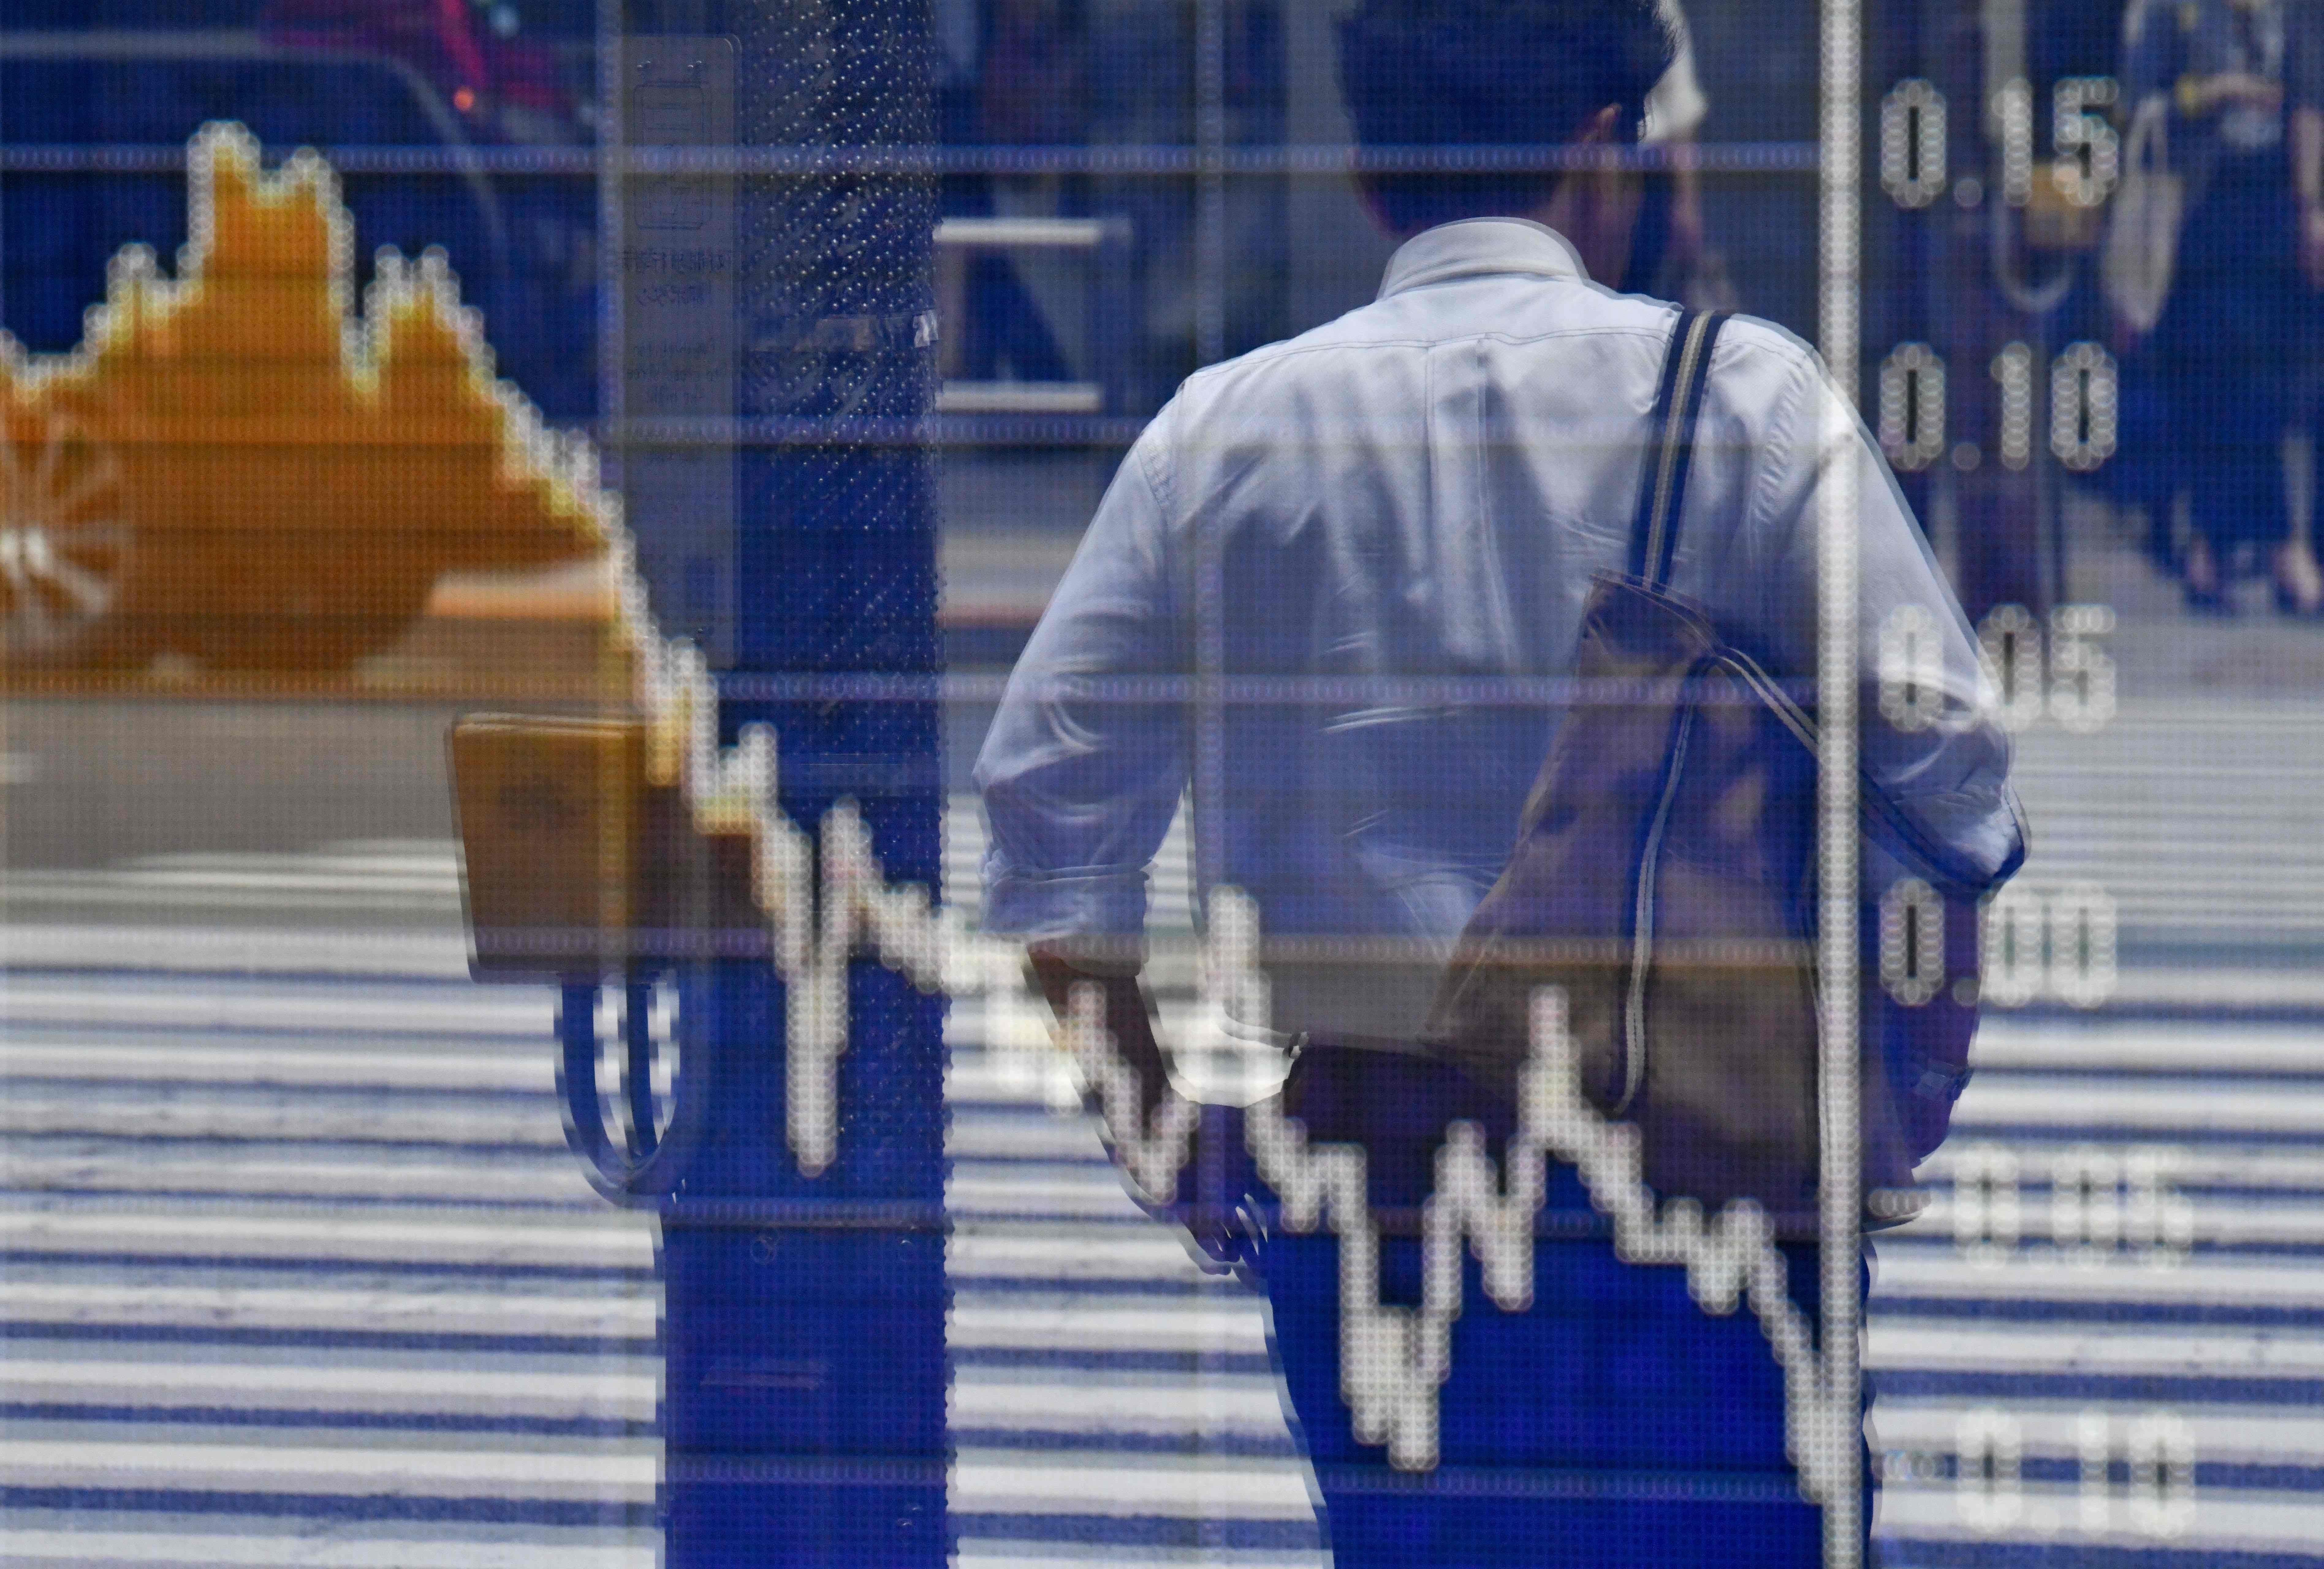 At the end of the day, predicting stock market moves over the short-to-medium term is extraordinarily hard. Photo: AFP